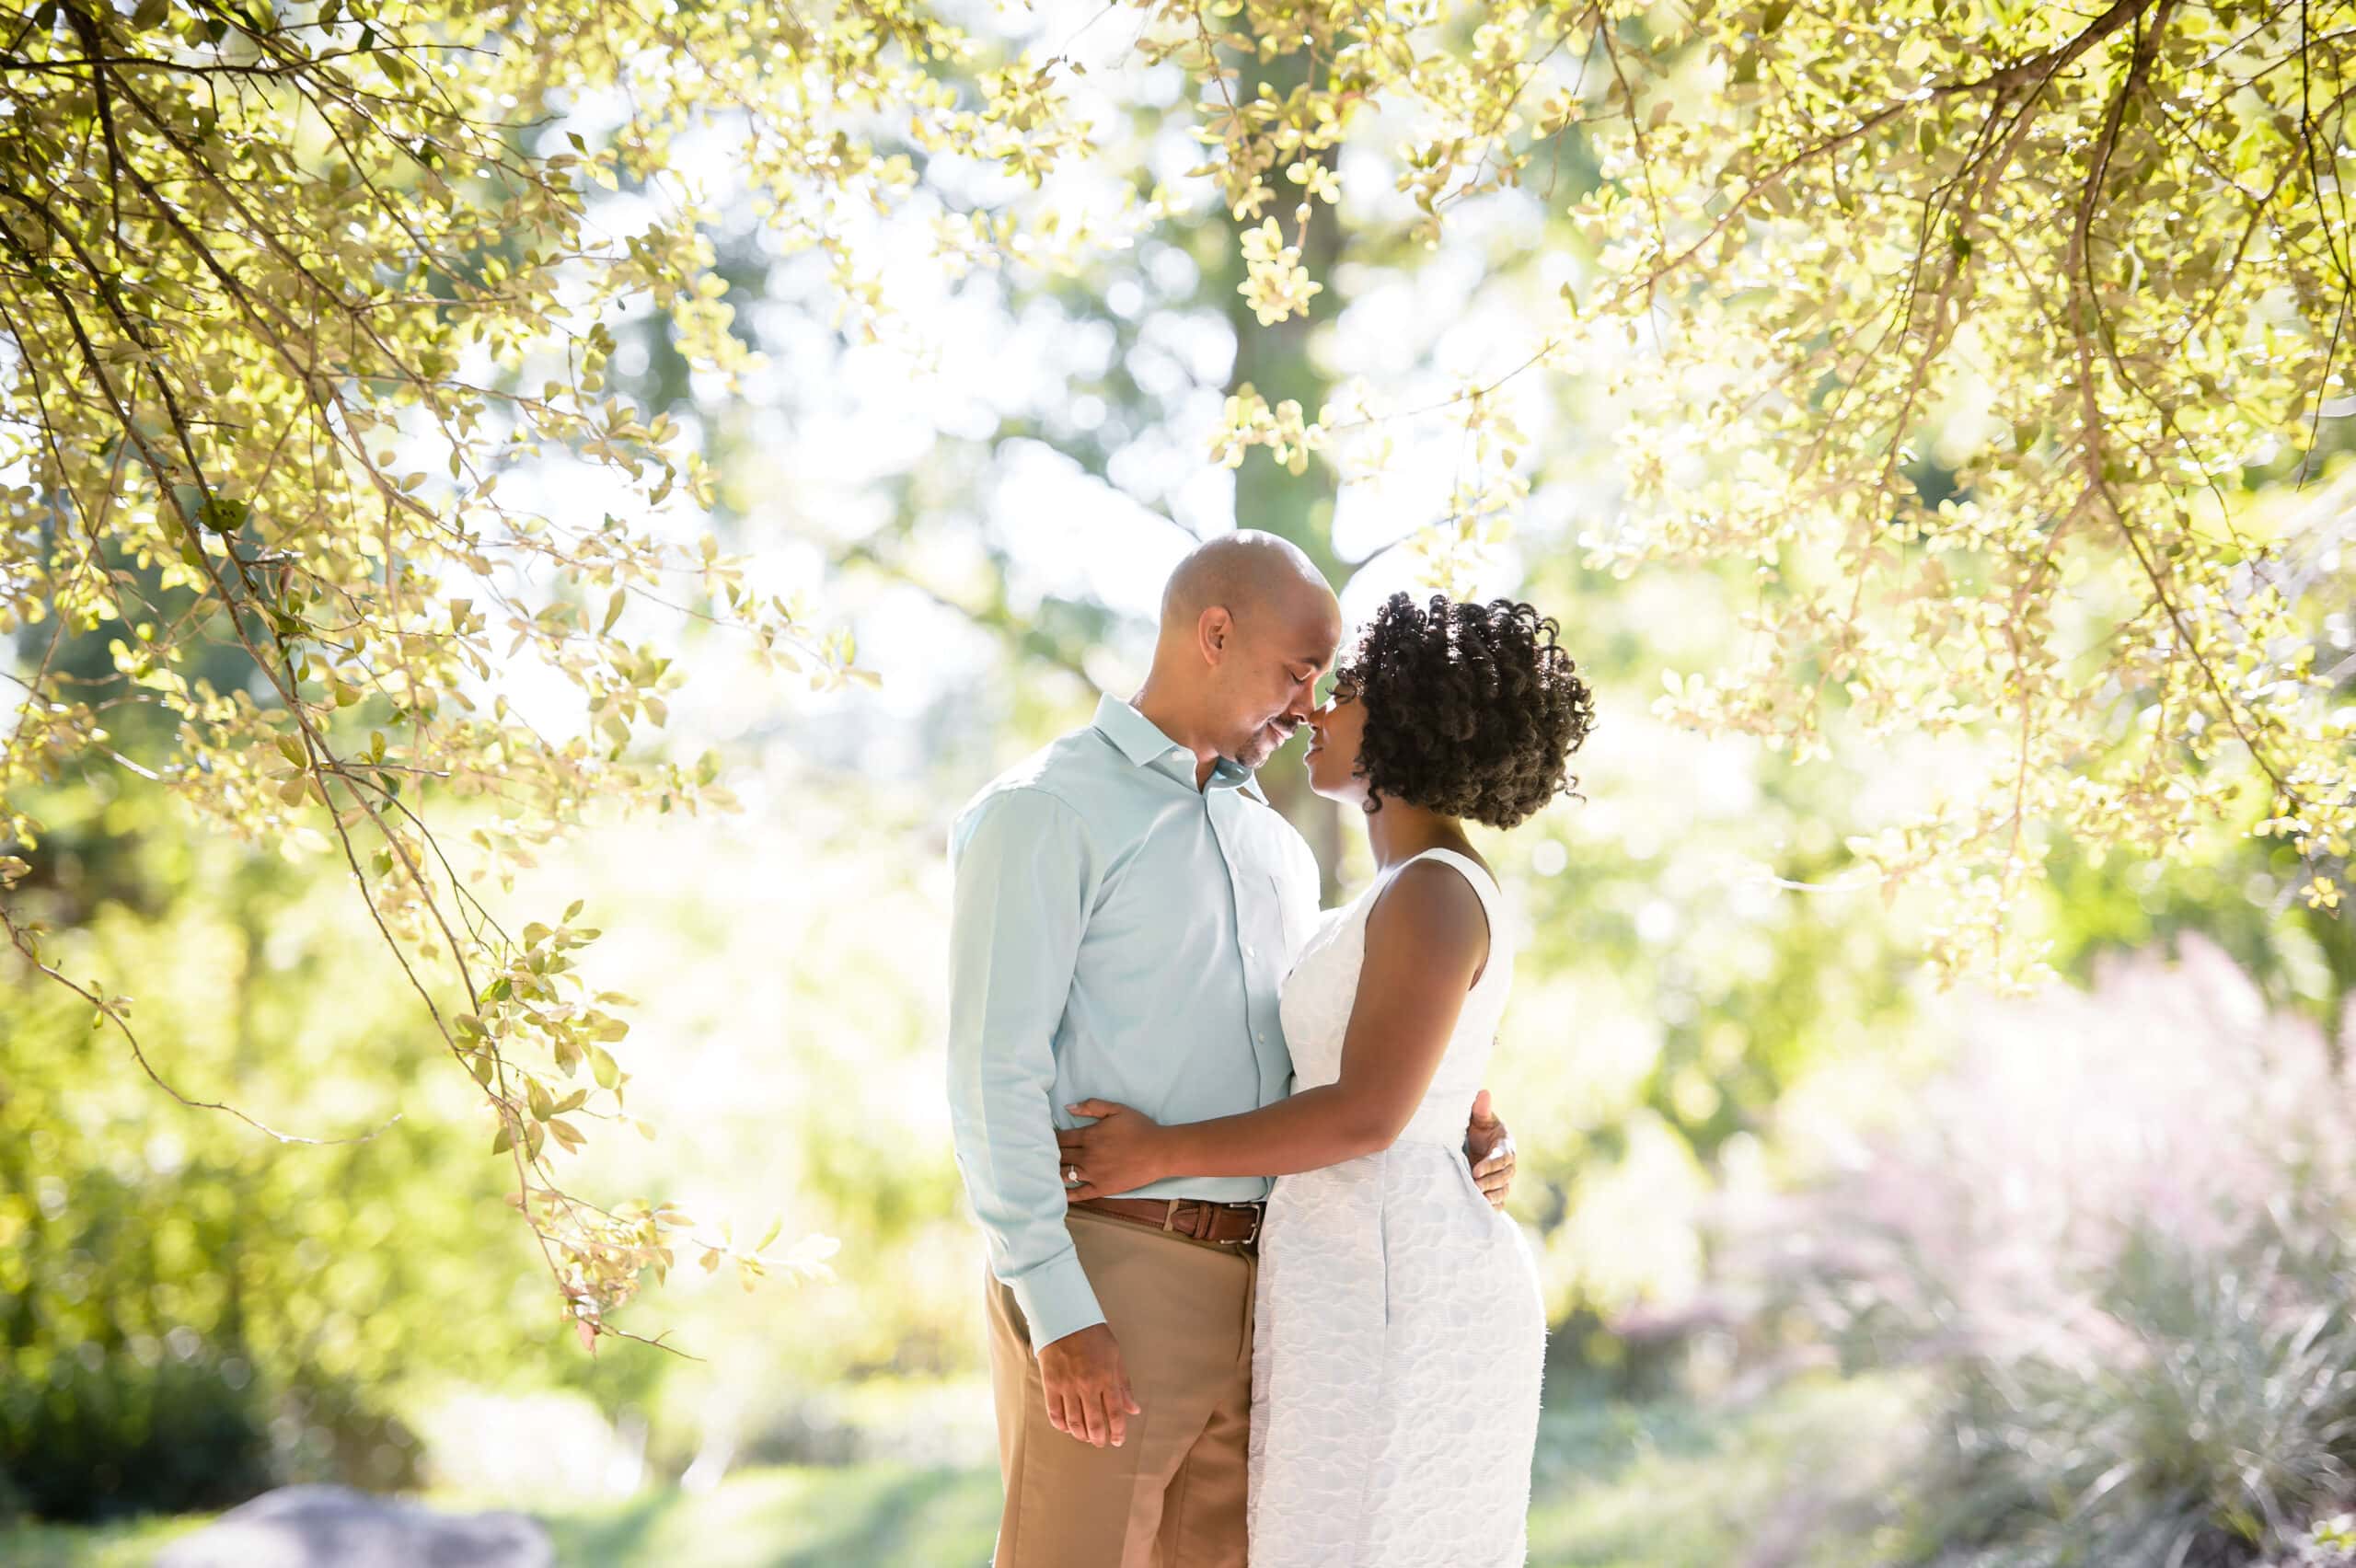 A couple kisses under a tree in one of the best locations for engagement photos in Fayetteville during their engagement session.